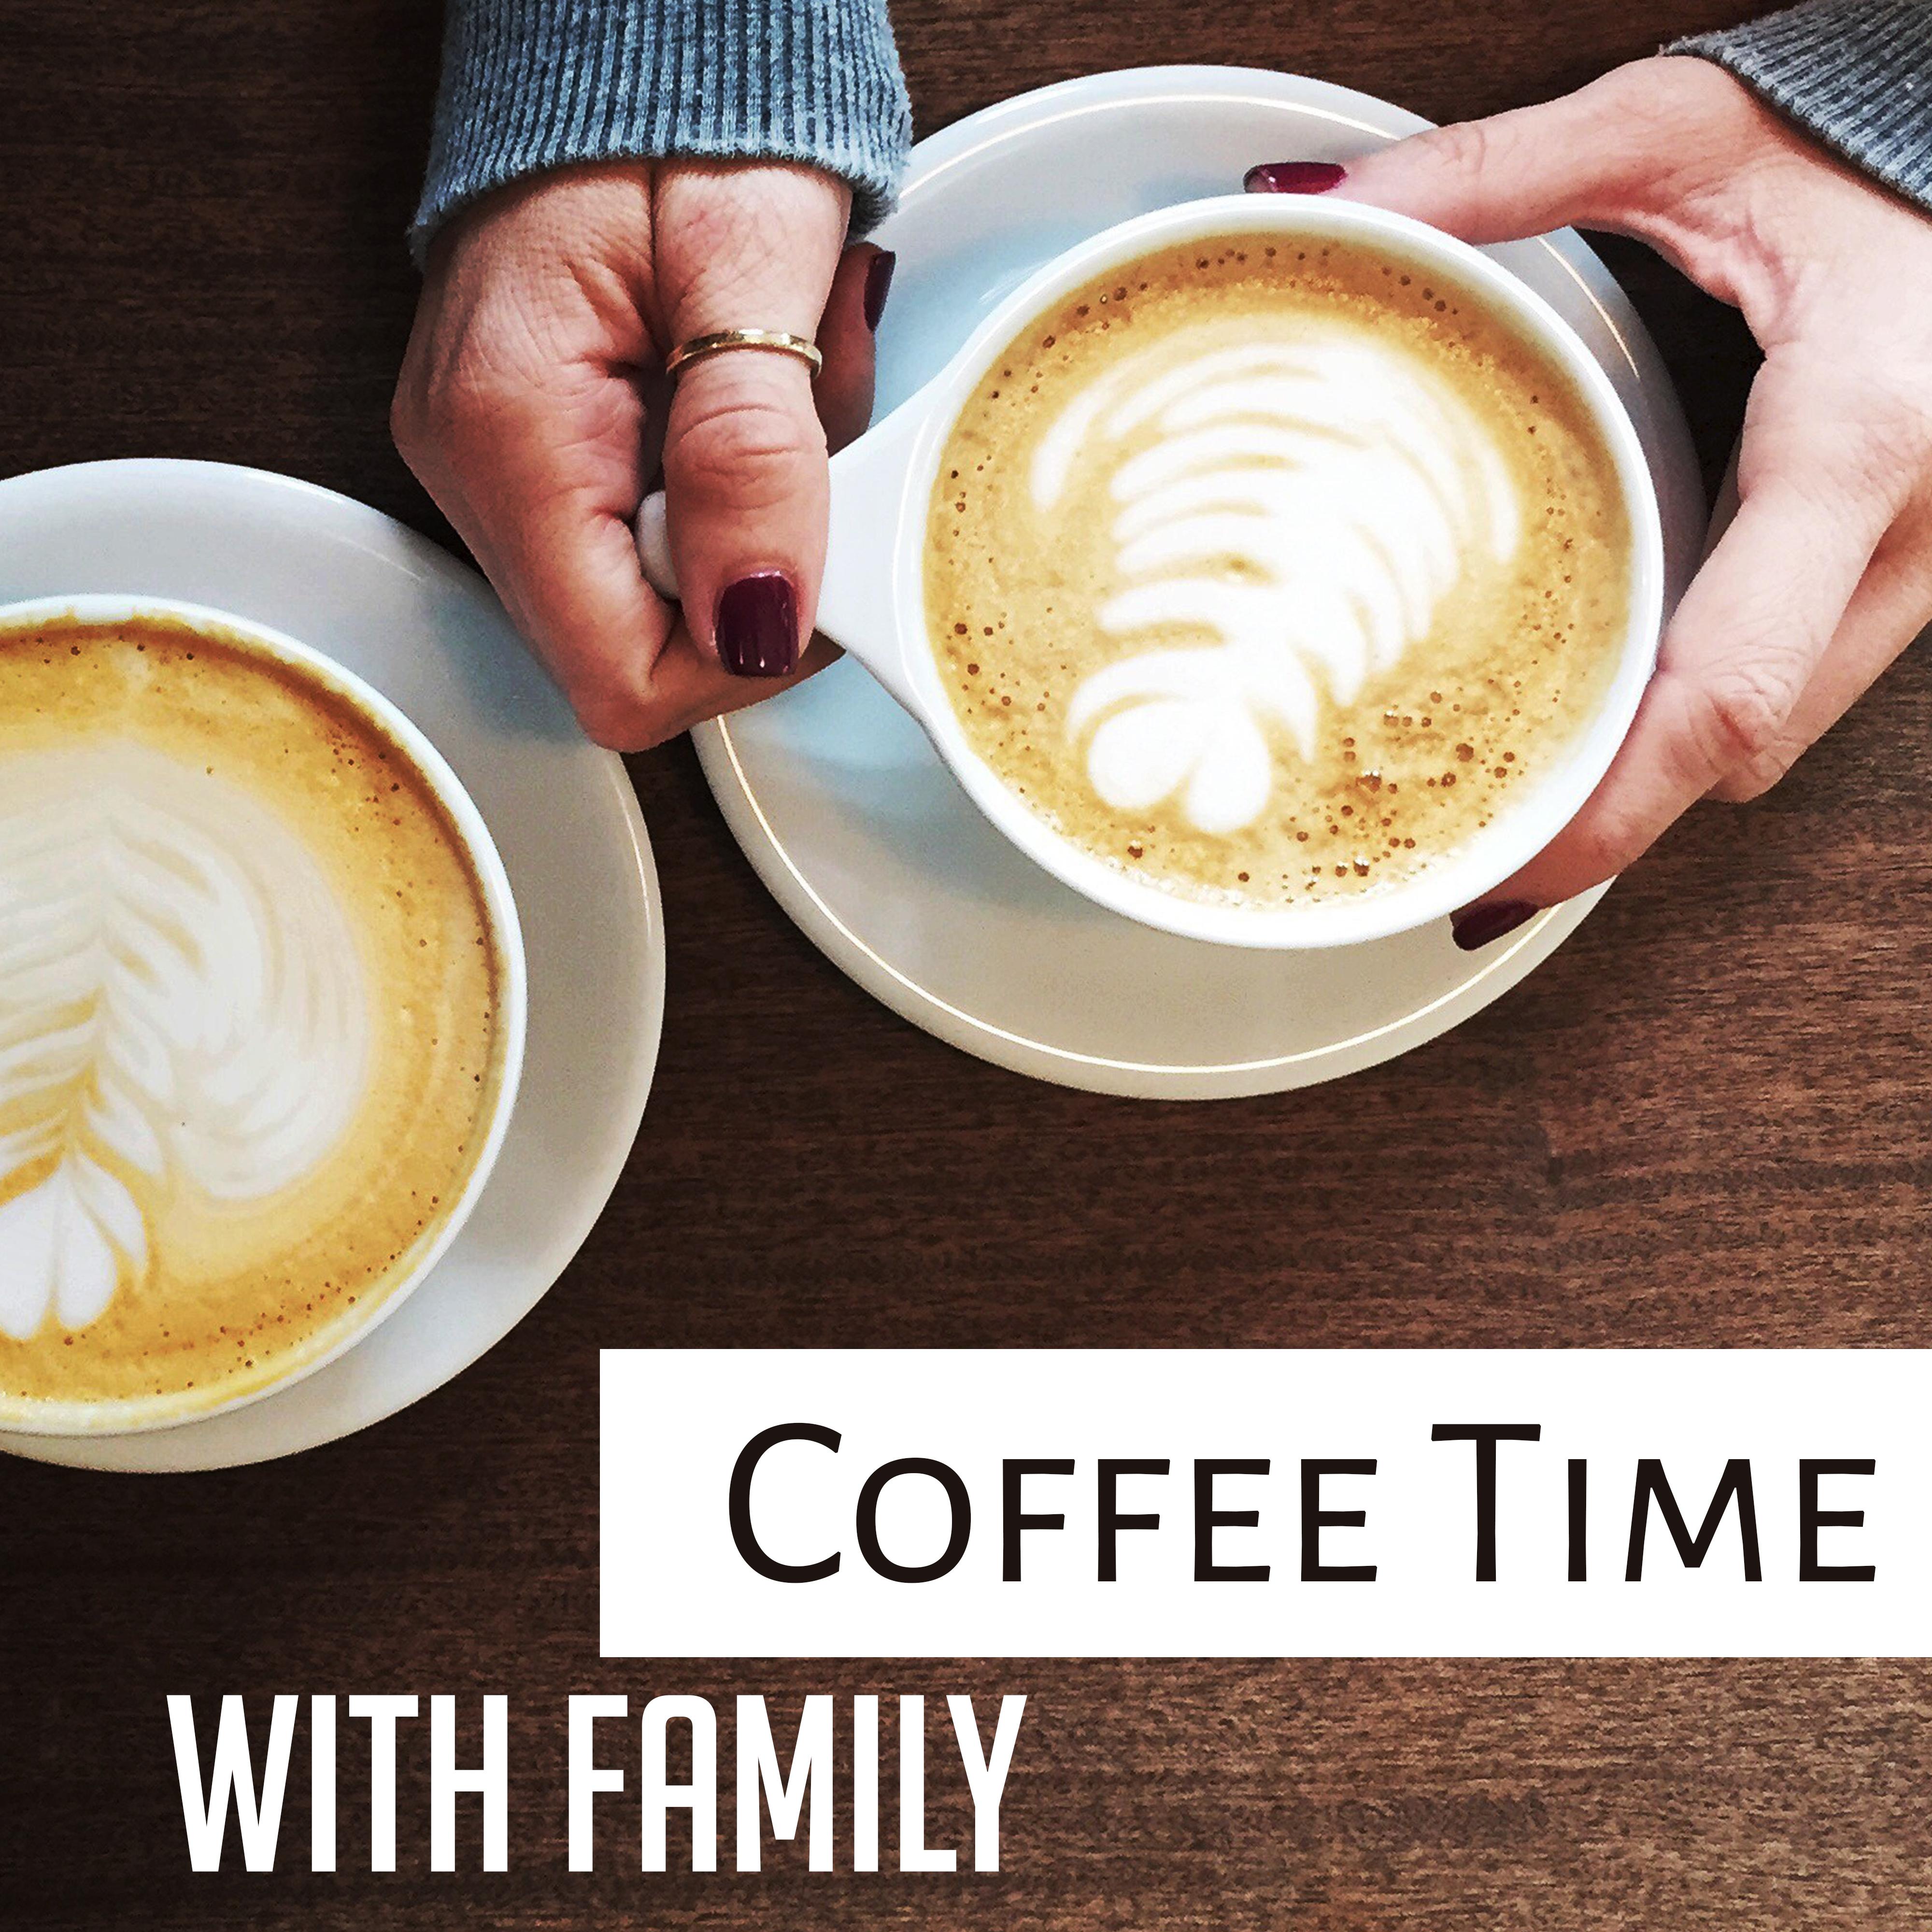 Coffee Time with Family  Jazz Cafe, Piano Bar, Best Smooth Jazz for Relaxation, Chilled Jazz, Instrumental Songs to Rest